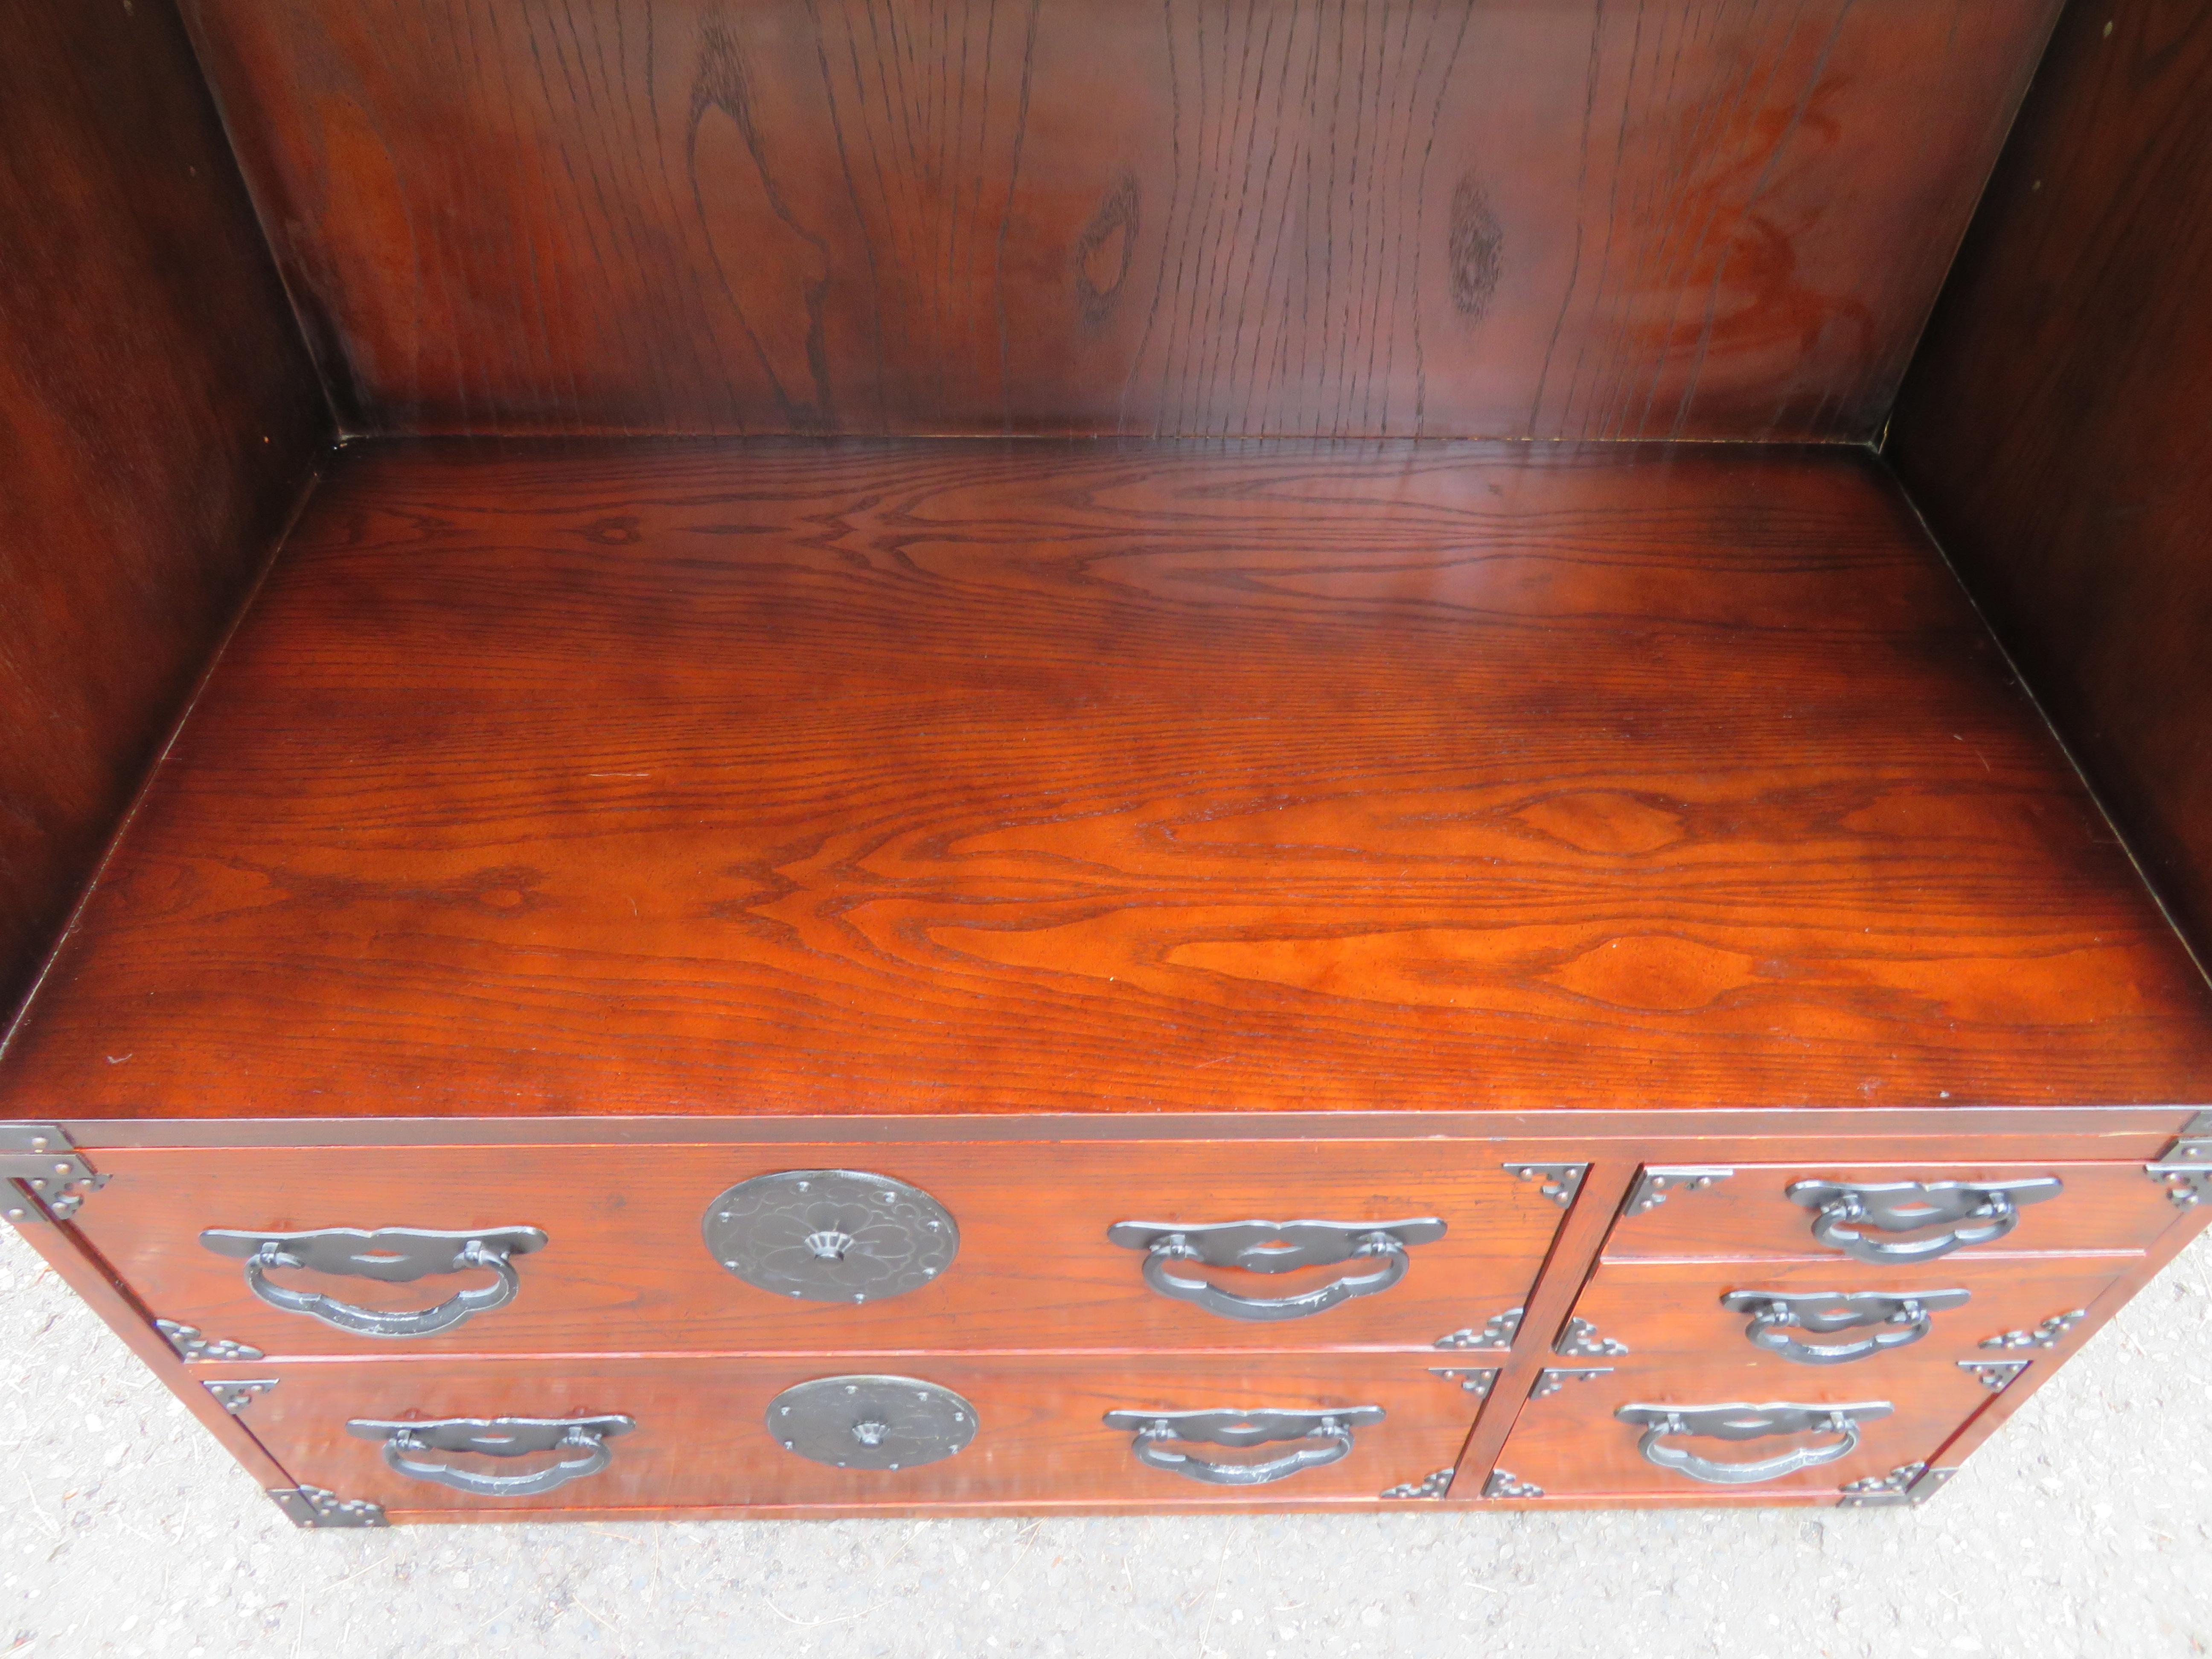 Unusual Baker Chinoiserie Modular Chest Bookcase Shelf Mid-Century Modern In Good Condition For Sale In Pemberton, NJ